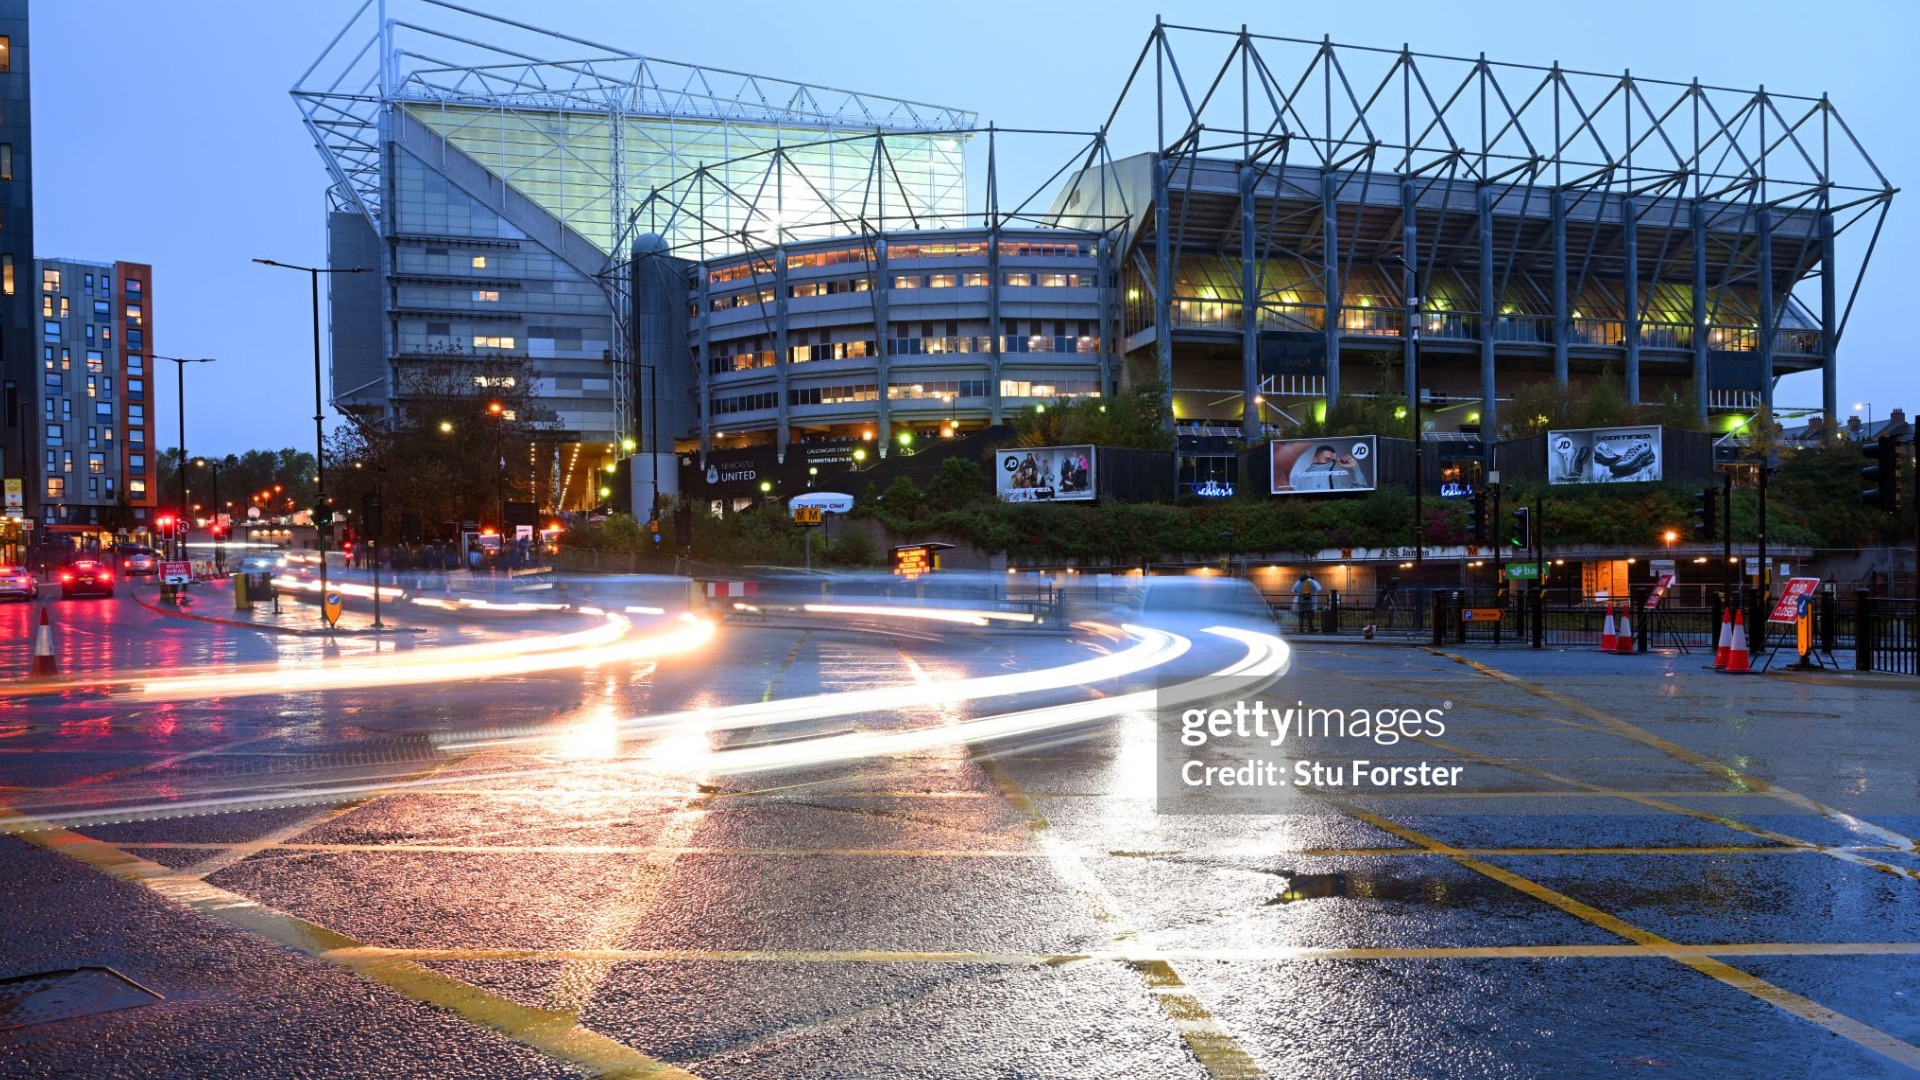 St James' Park prior to the UEFA Champions League match between Newcastle United FC and Borussia Dortmund